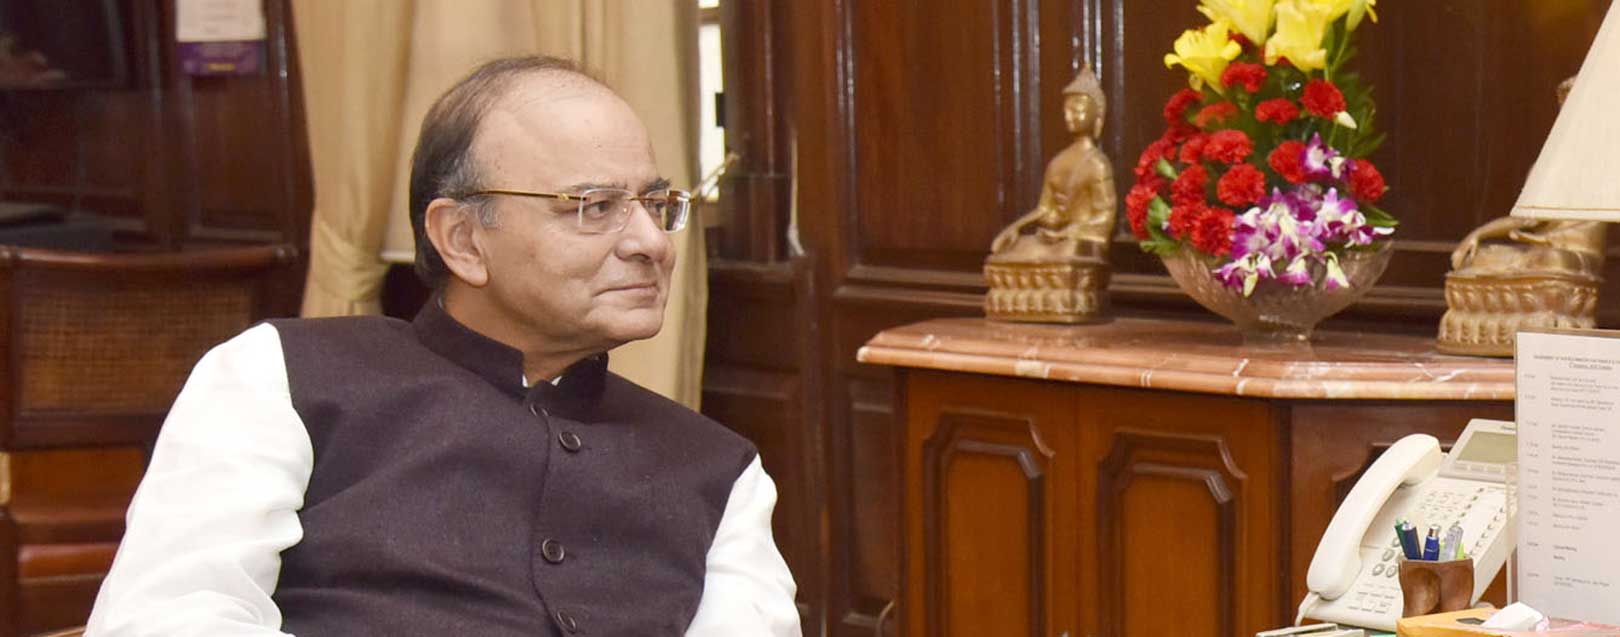 ‘Make in Odisha’ conclave to host Arun Jaitley, key industry leaders